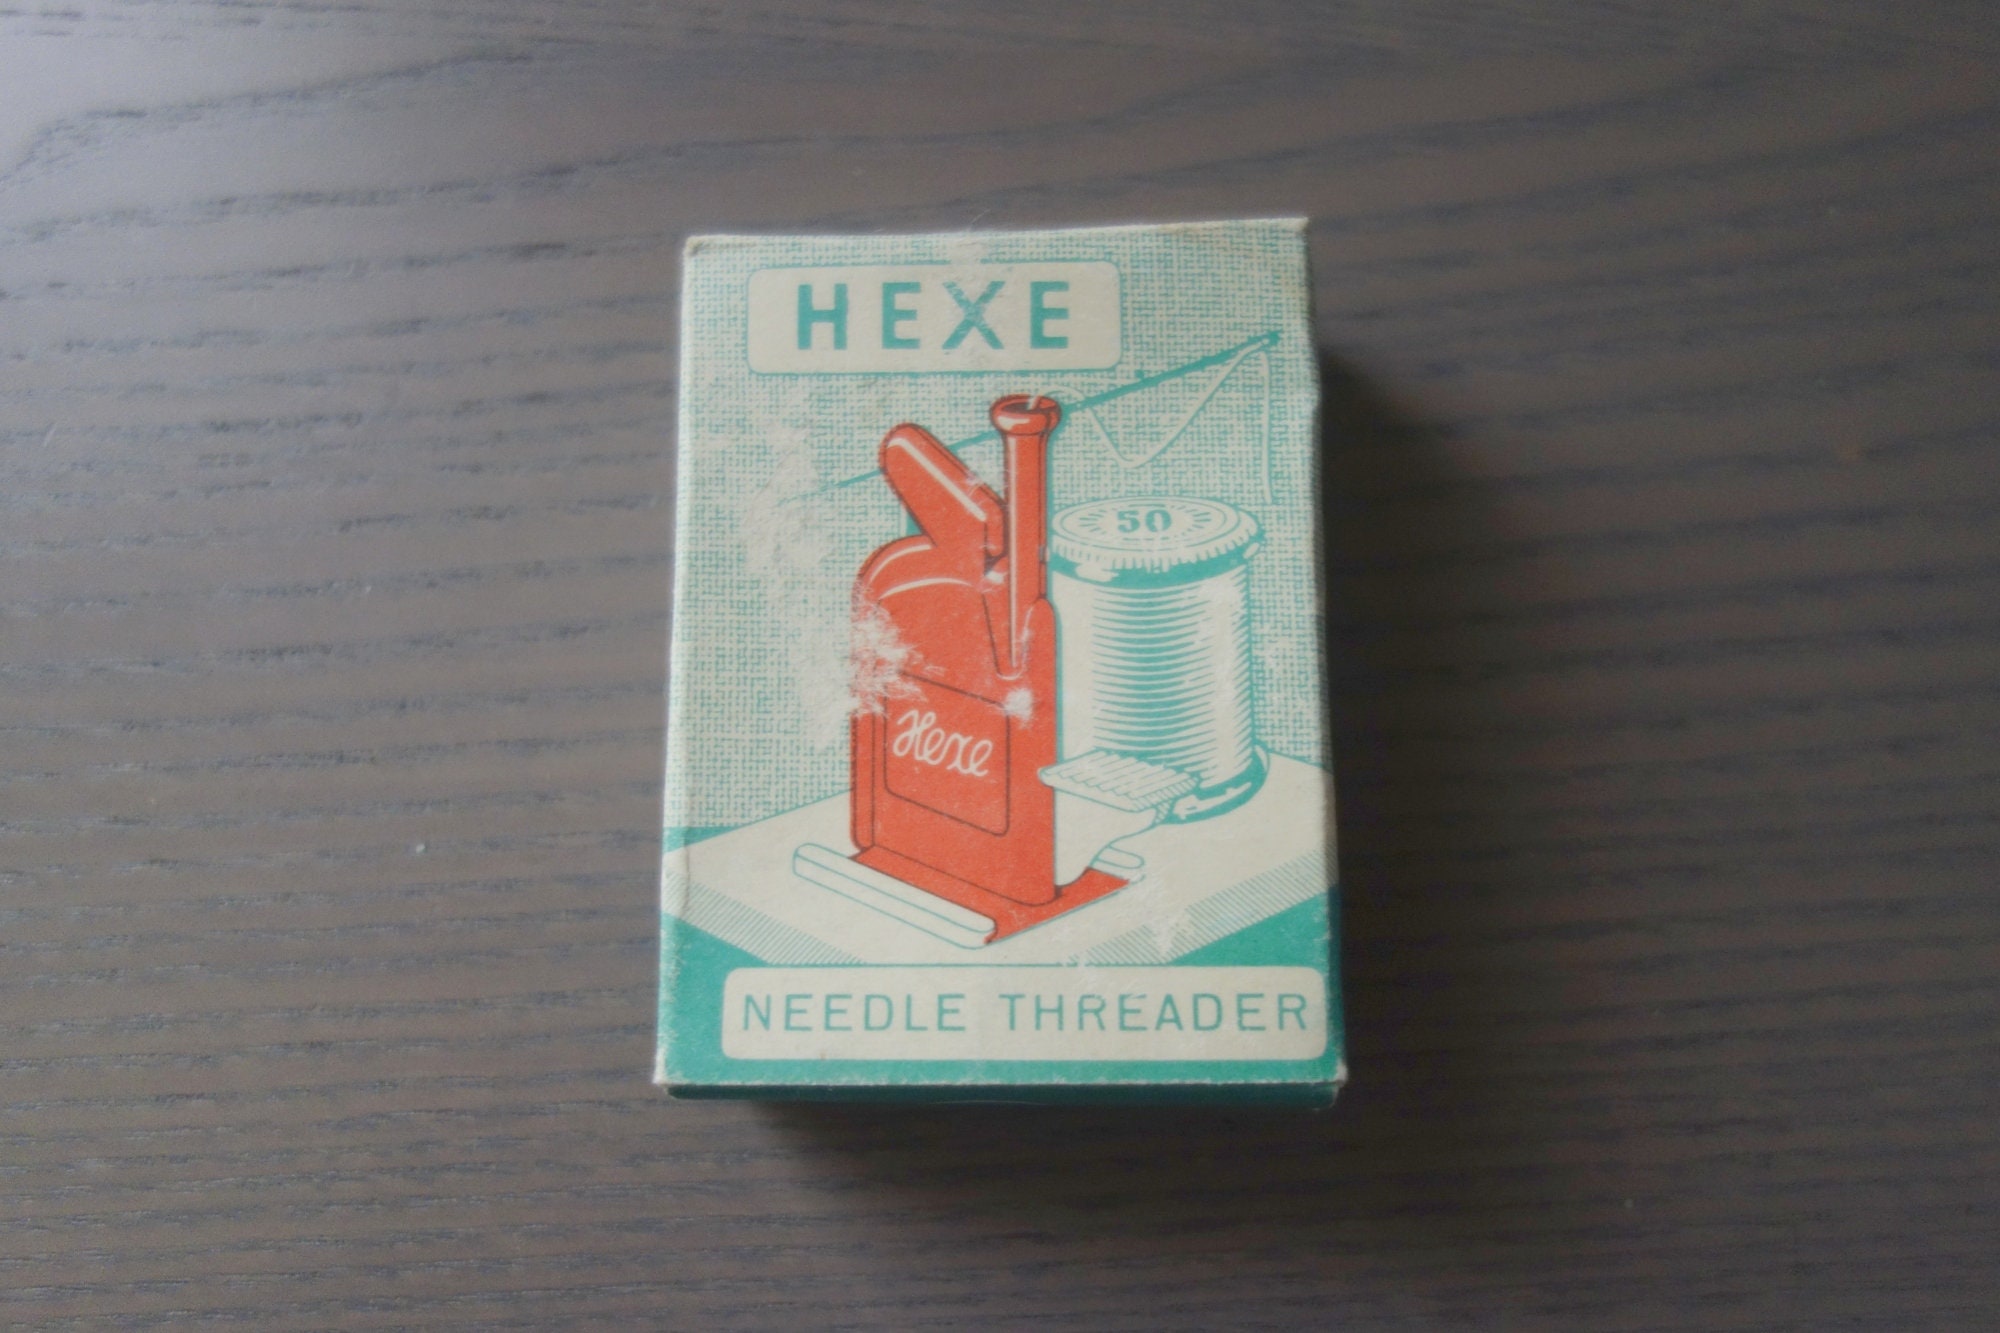 Hexe & Witch Needle Threaders - visiblemending